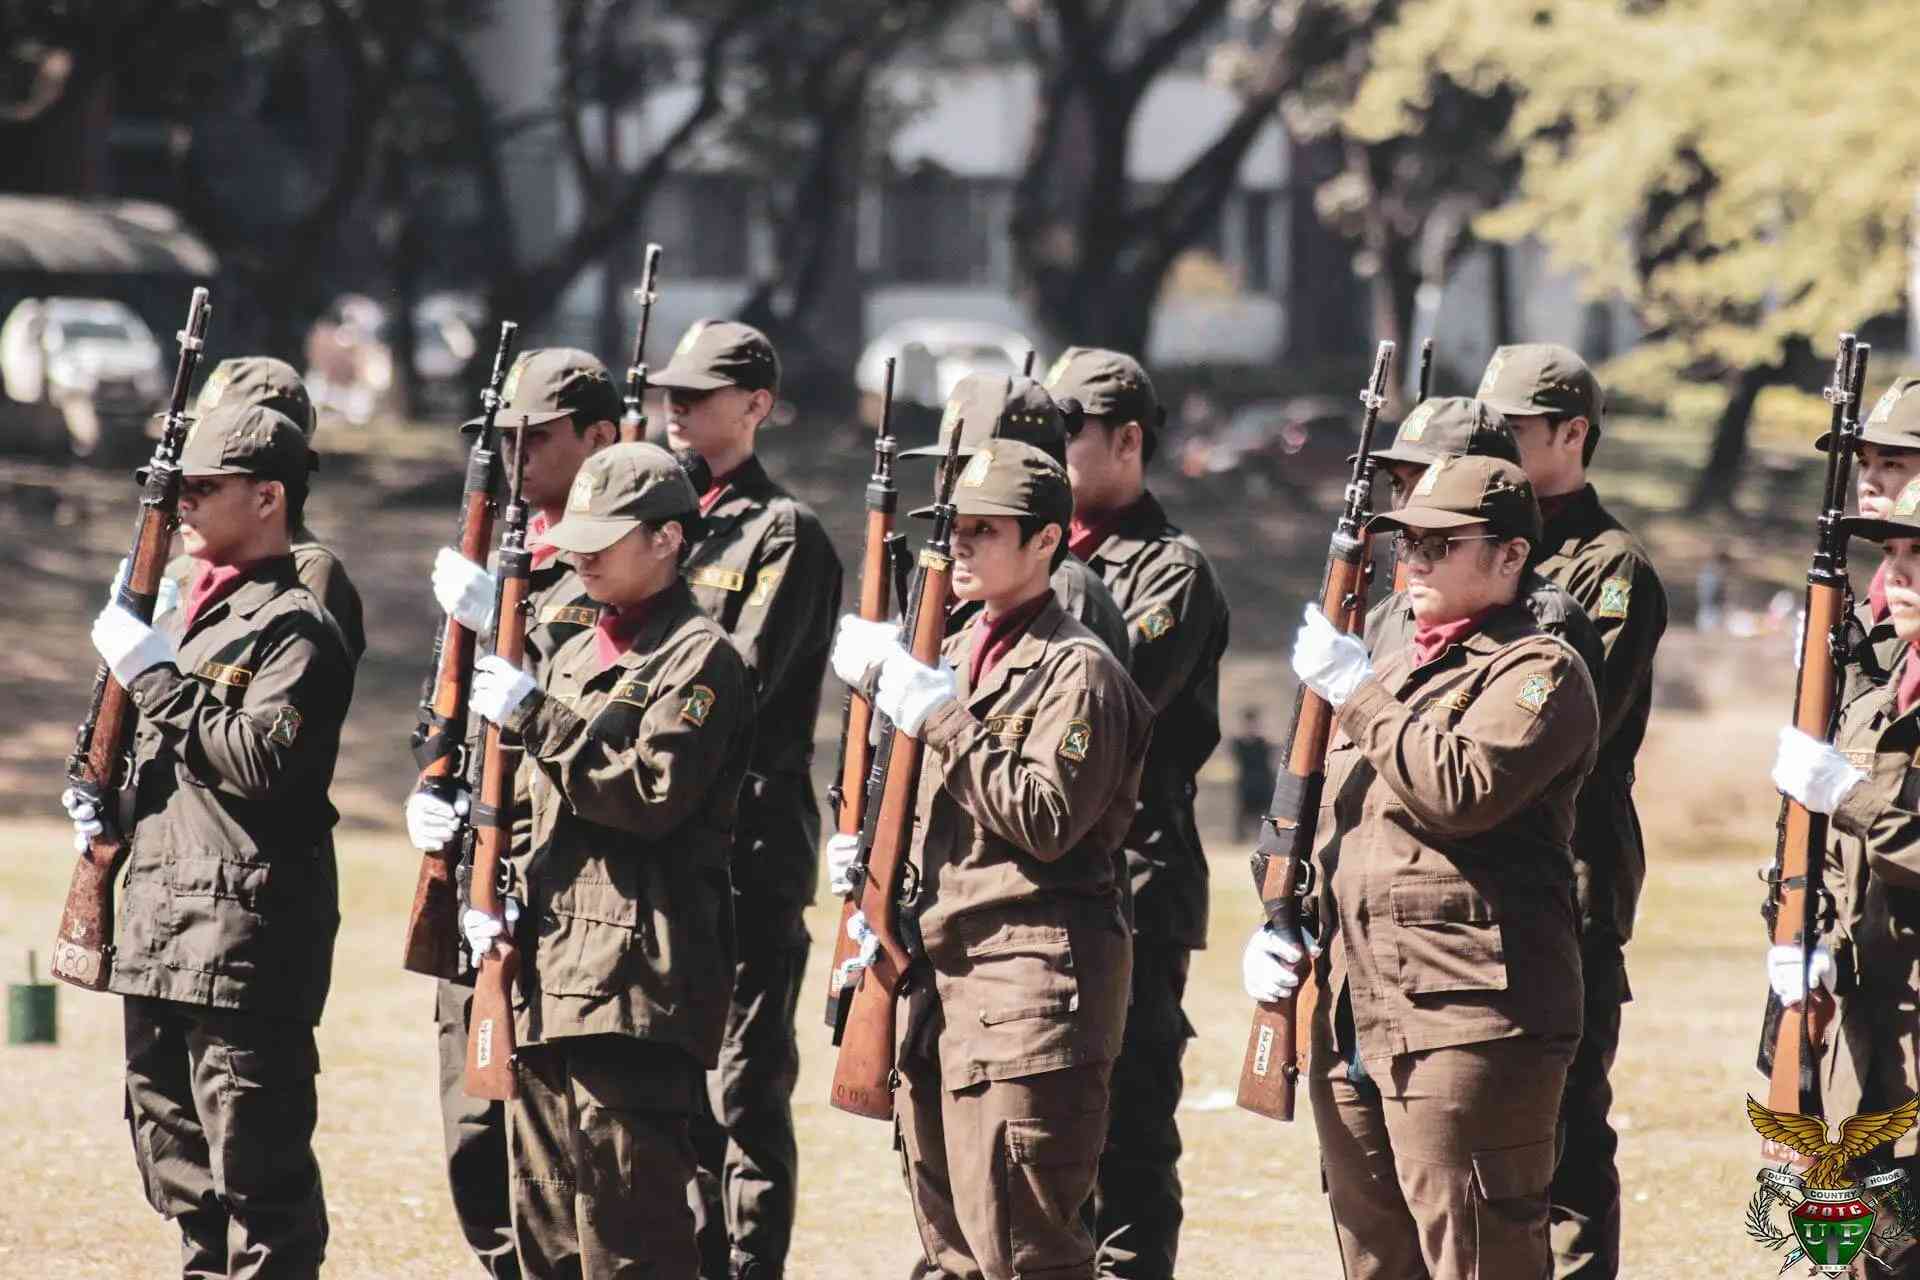 8 of 10 Pinoys support mandatory ROTC, survey shows